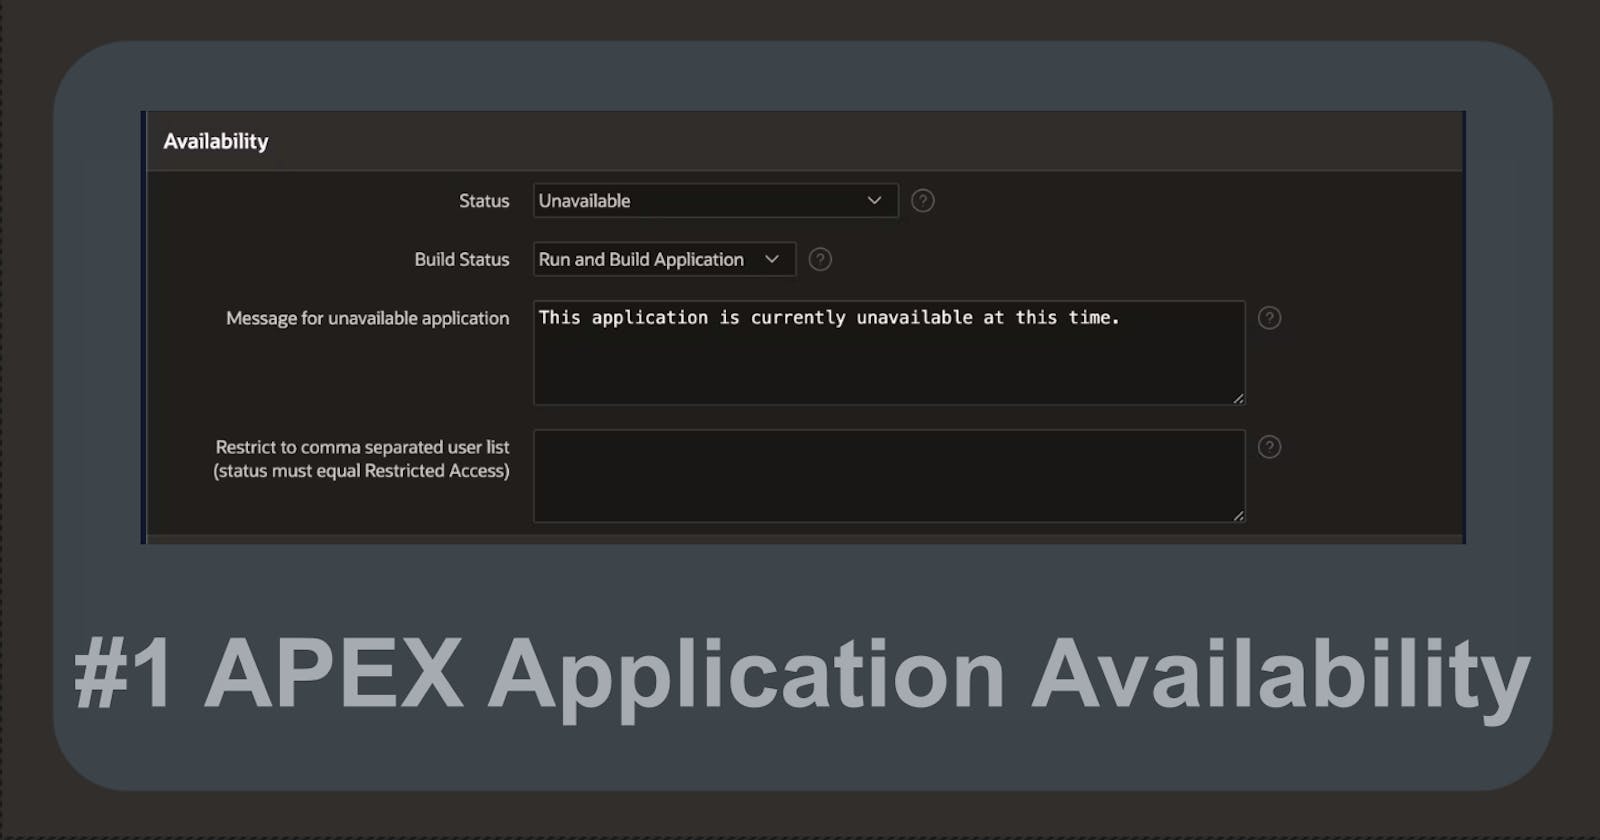 Tip#1 Application Availability